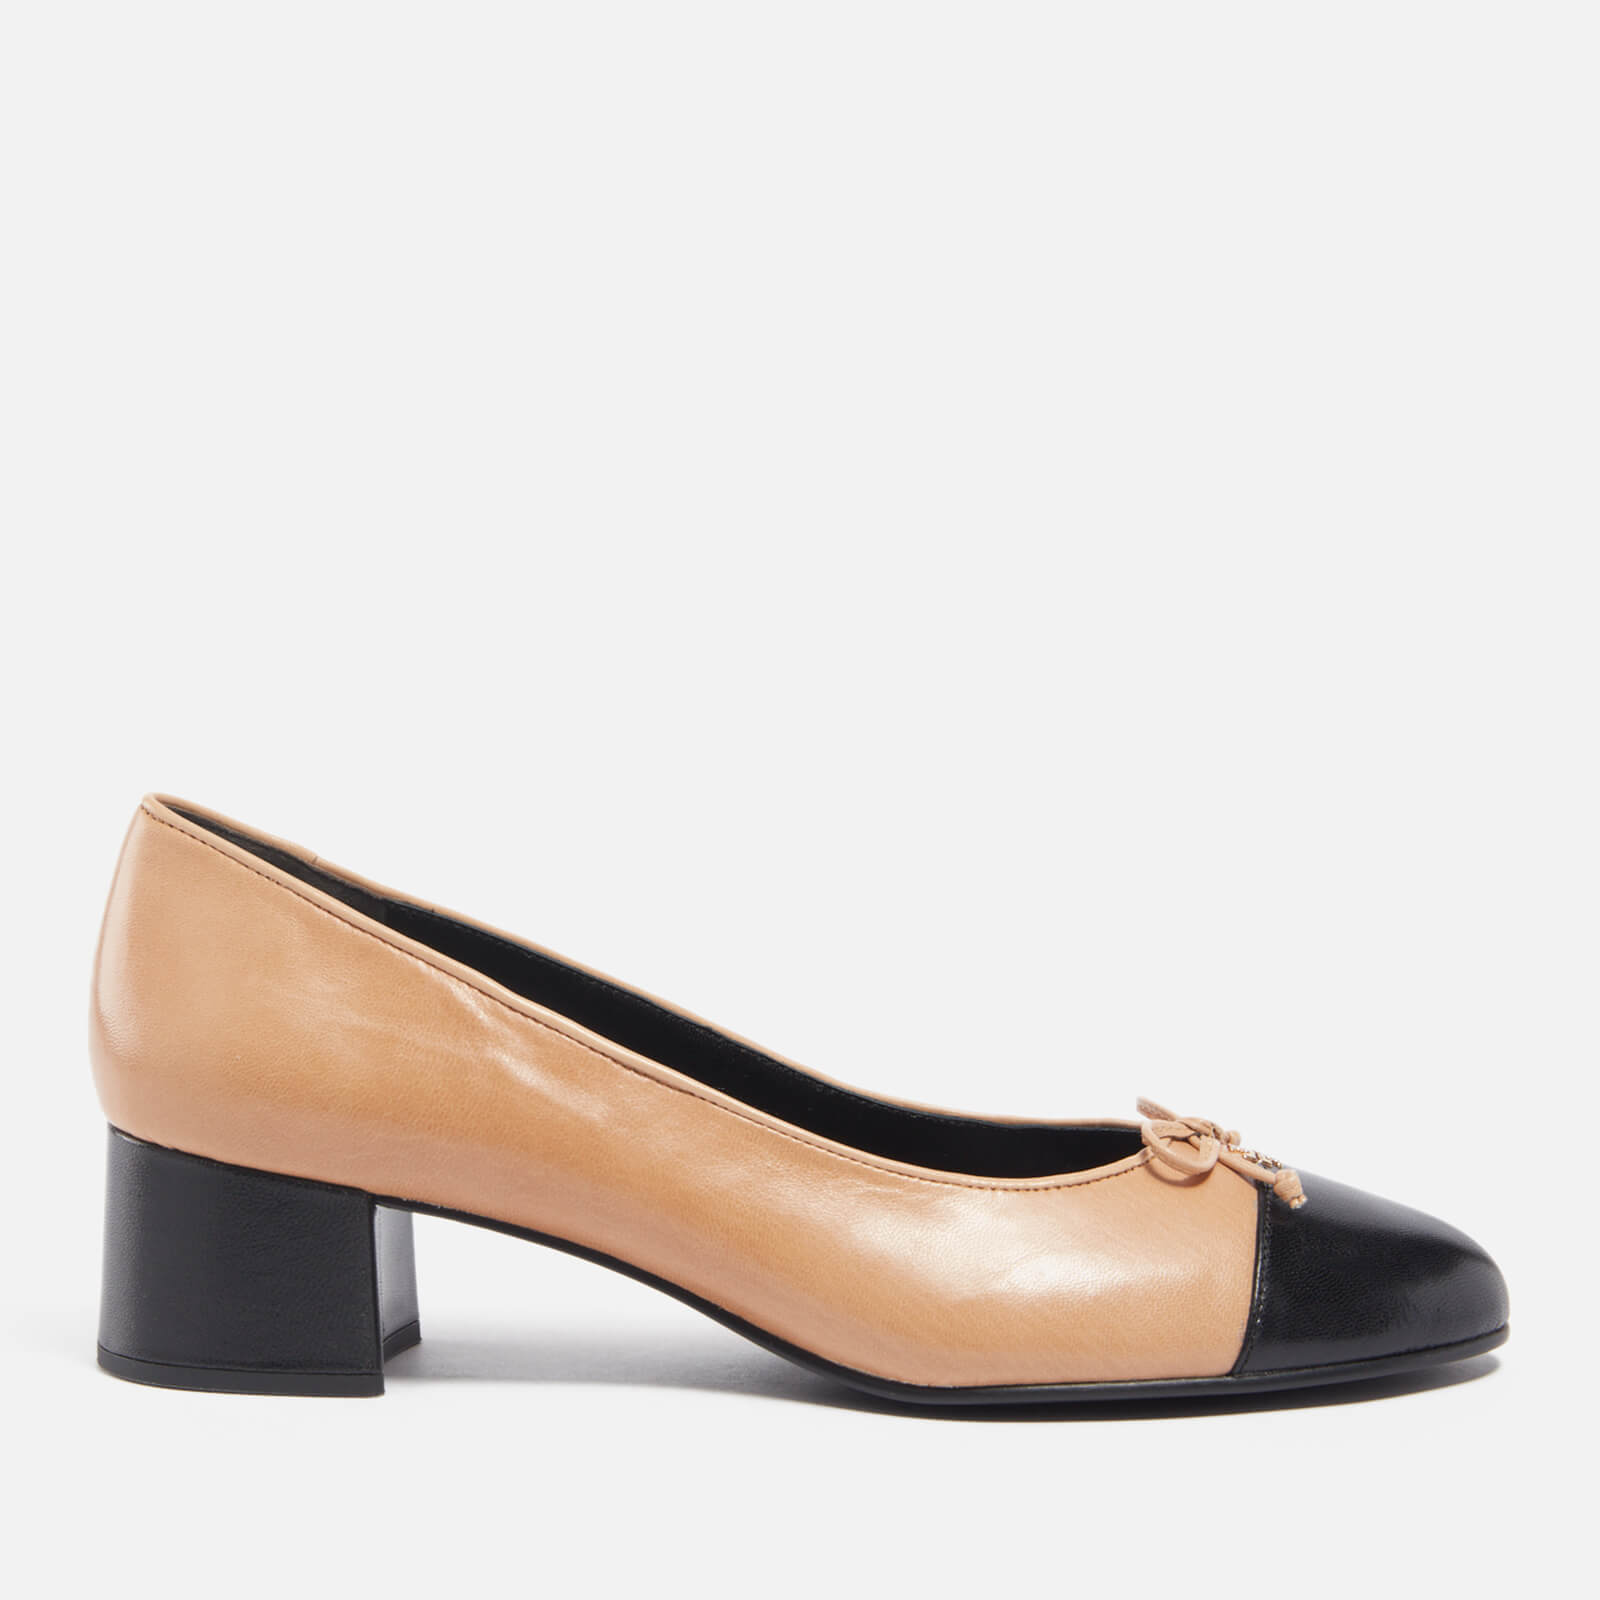 Tory Burch Women’s Two-Tone Leather Heeled Pumps